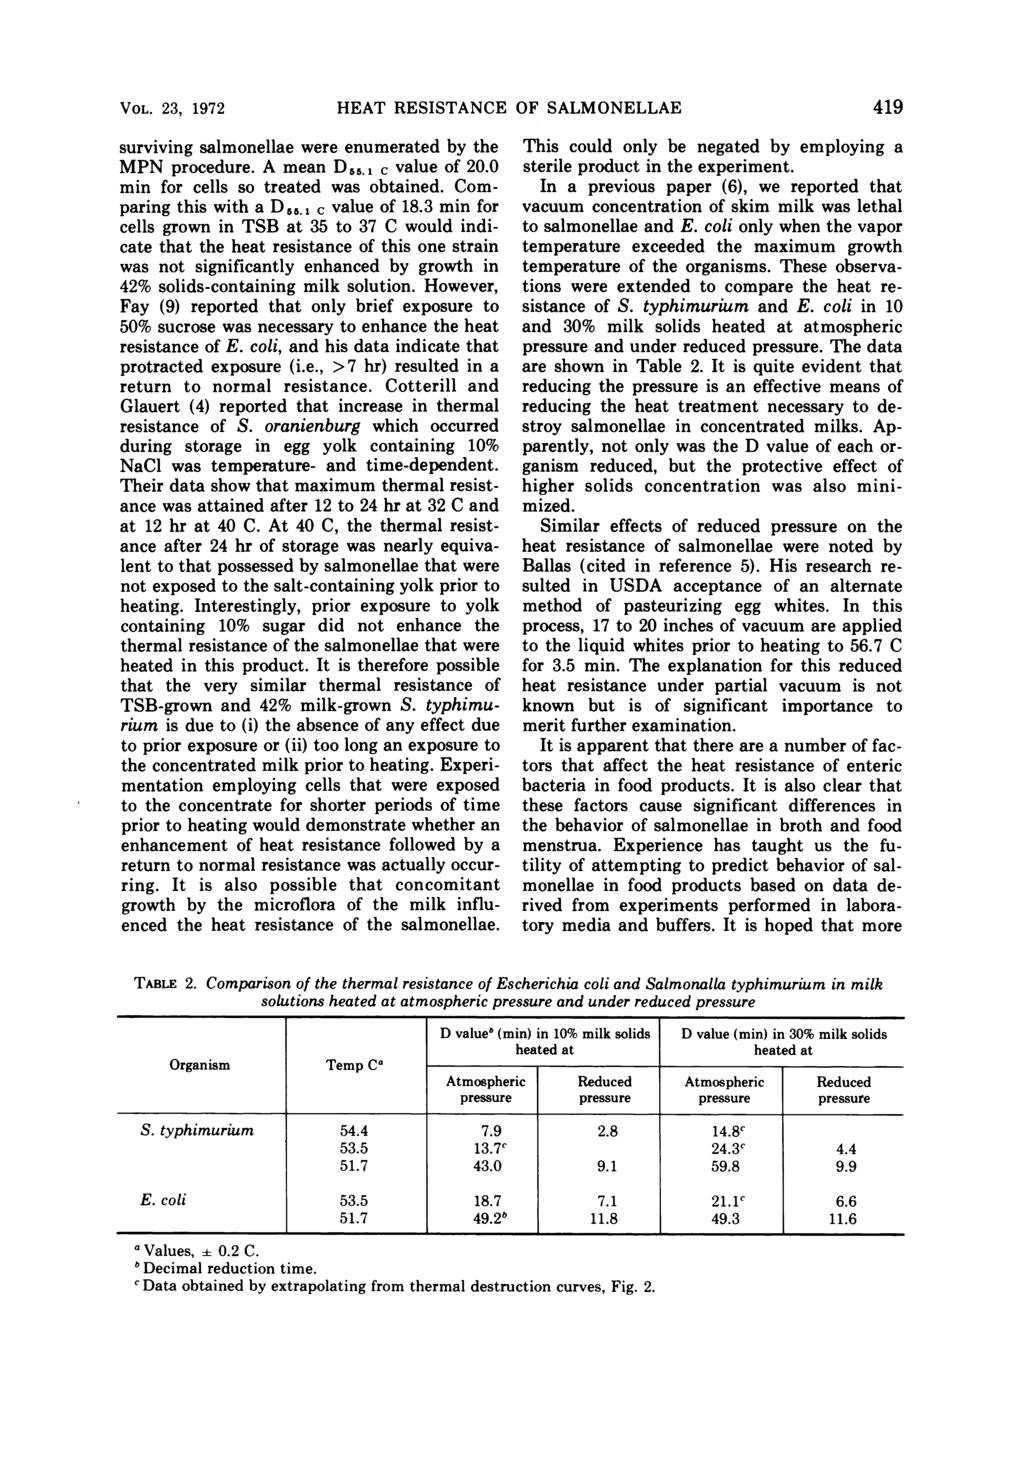 VOL. 23, 1972 HEAT RESISTANCE OF SALMONELLAE surviving salmonellae were enumerated by the MPN procedure. A mean D55.1 c of 20.0 min for cells so treated was obtained. Comparing this with a D,5.